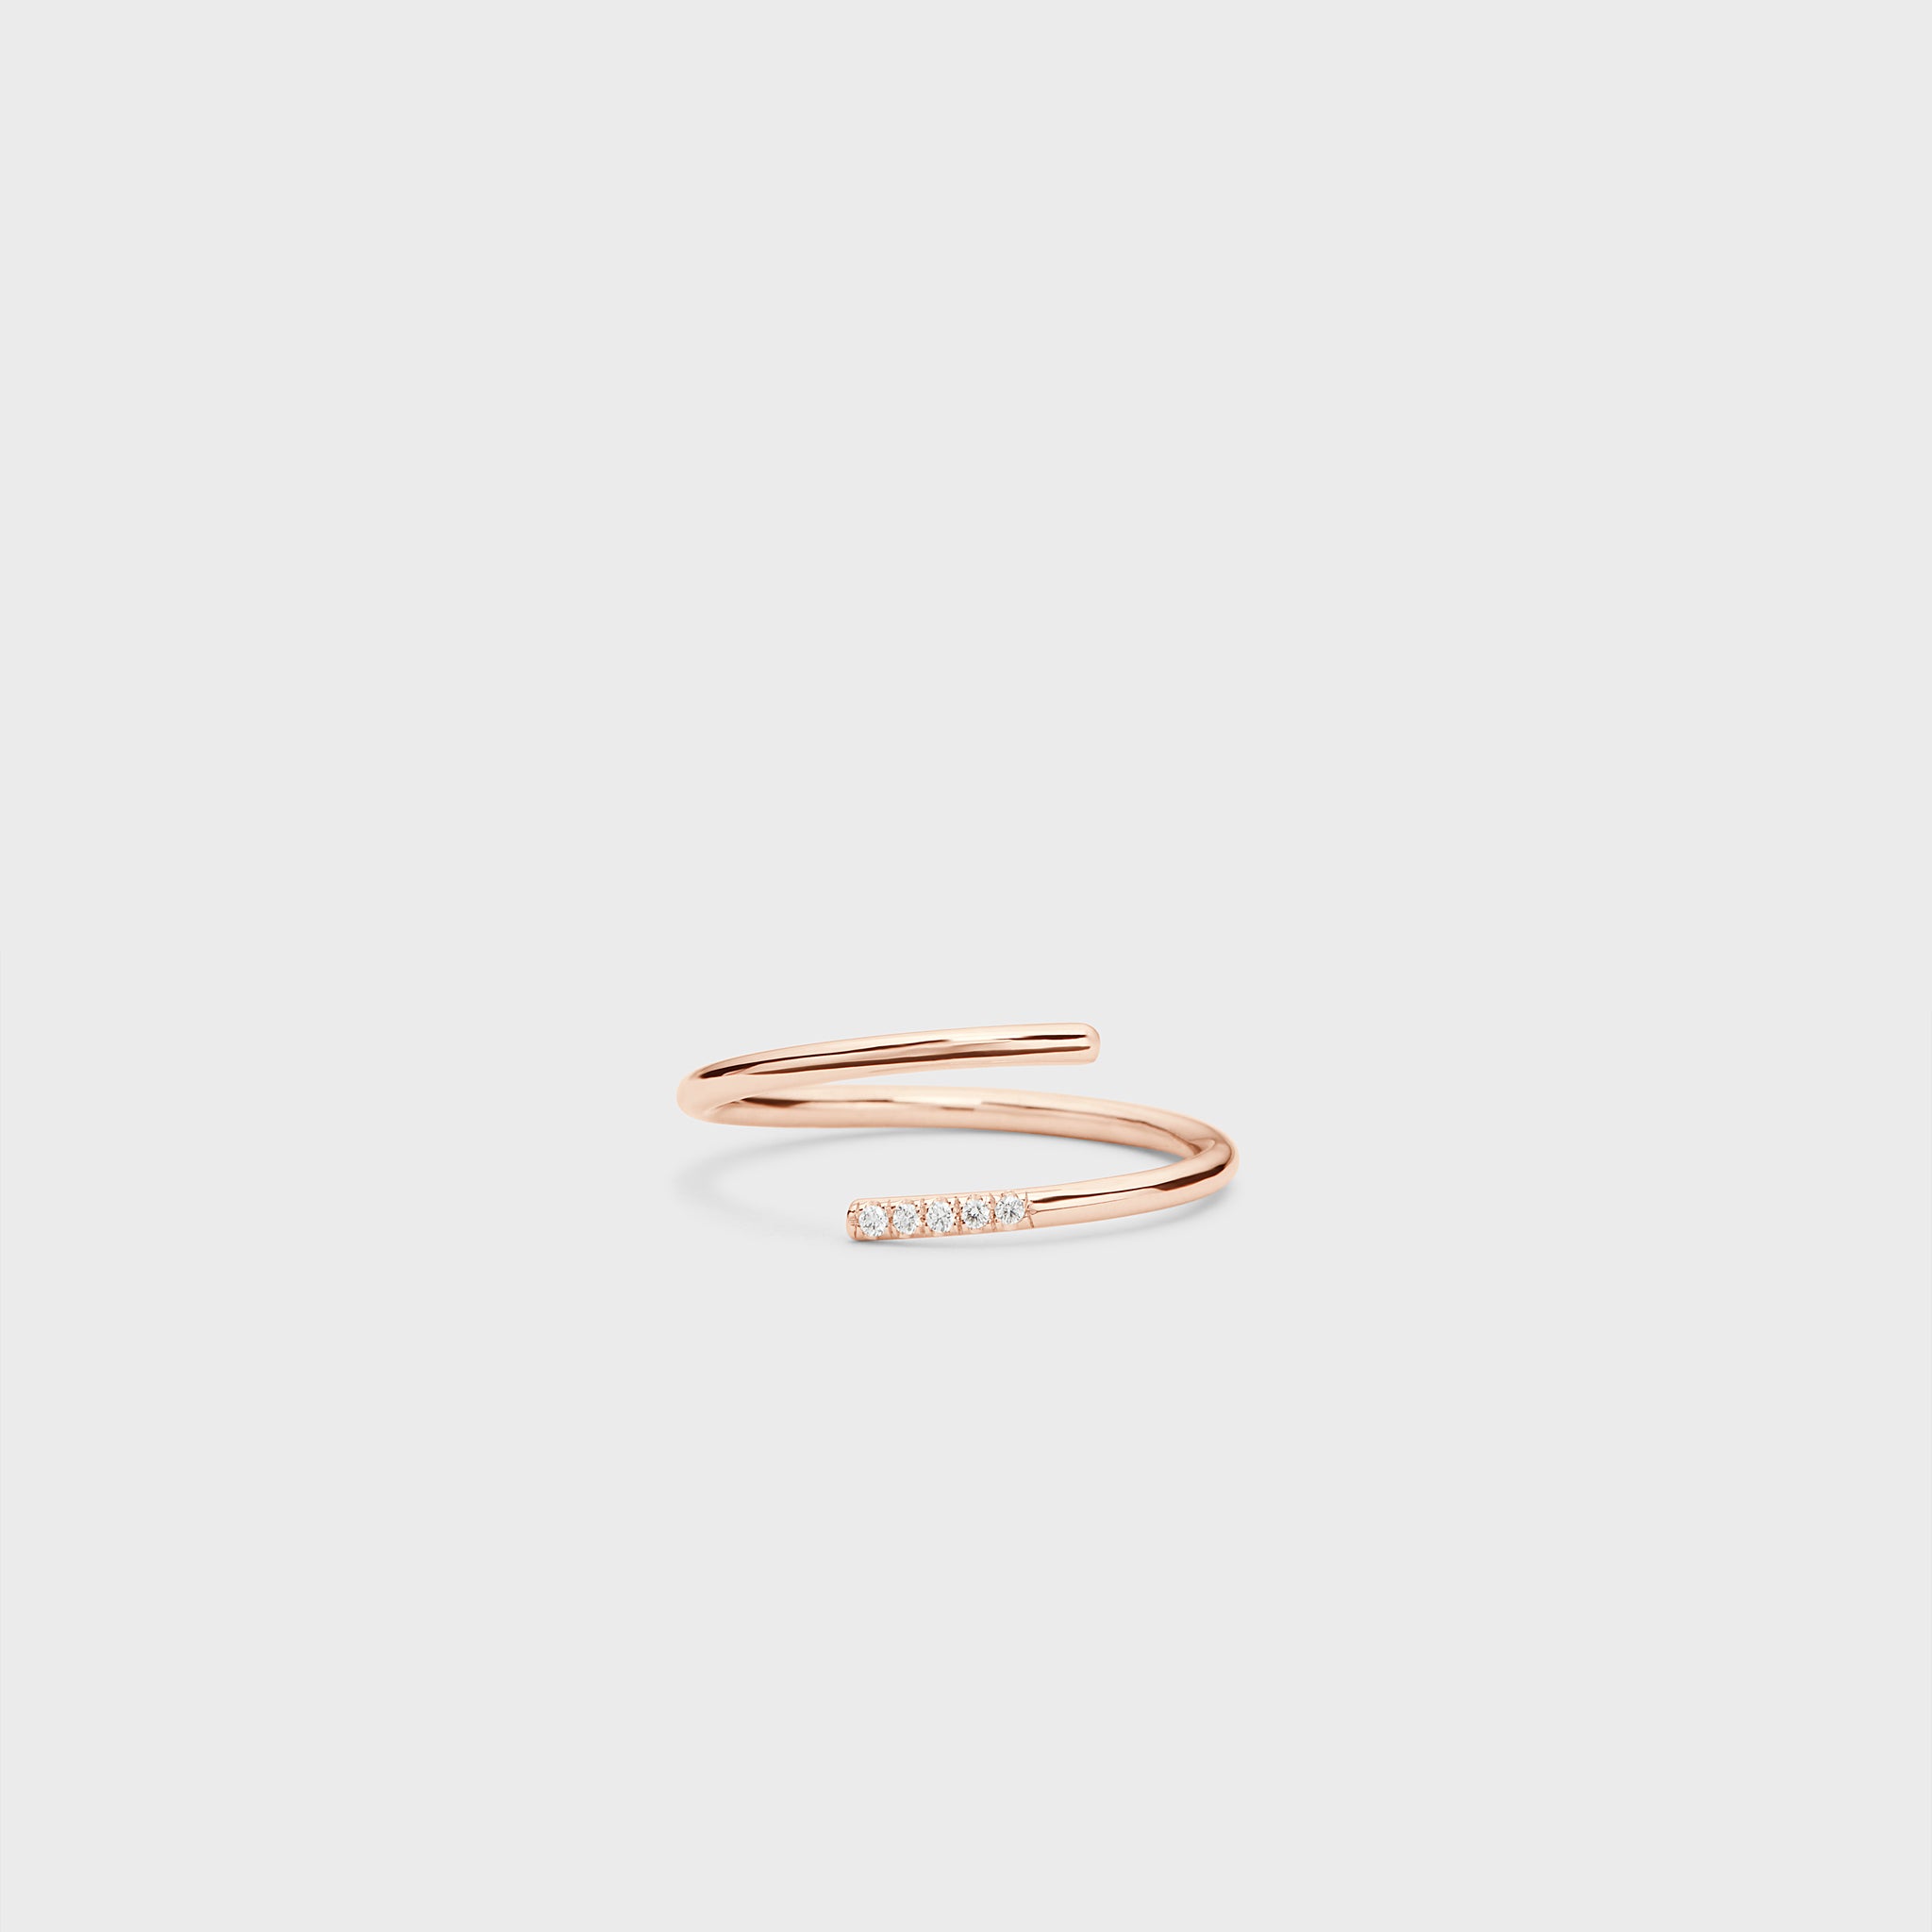 Apt voor mij krom Wrap Me Up Ring - The Clear Cut Collection